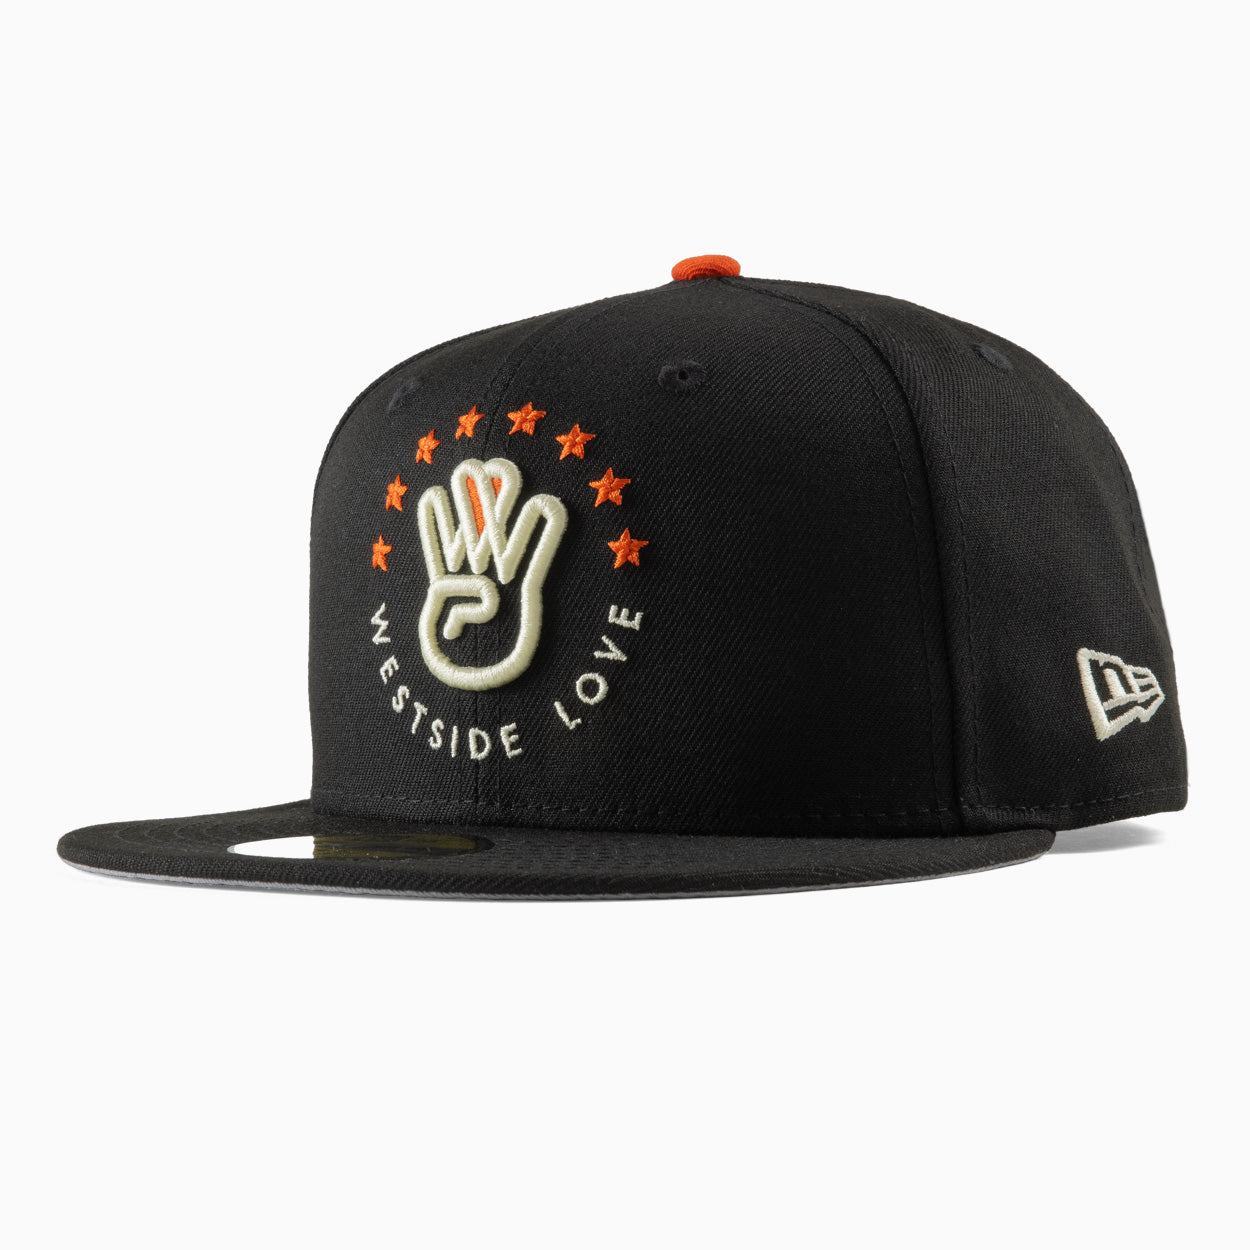 Union SF New Era Fitted